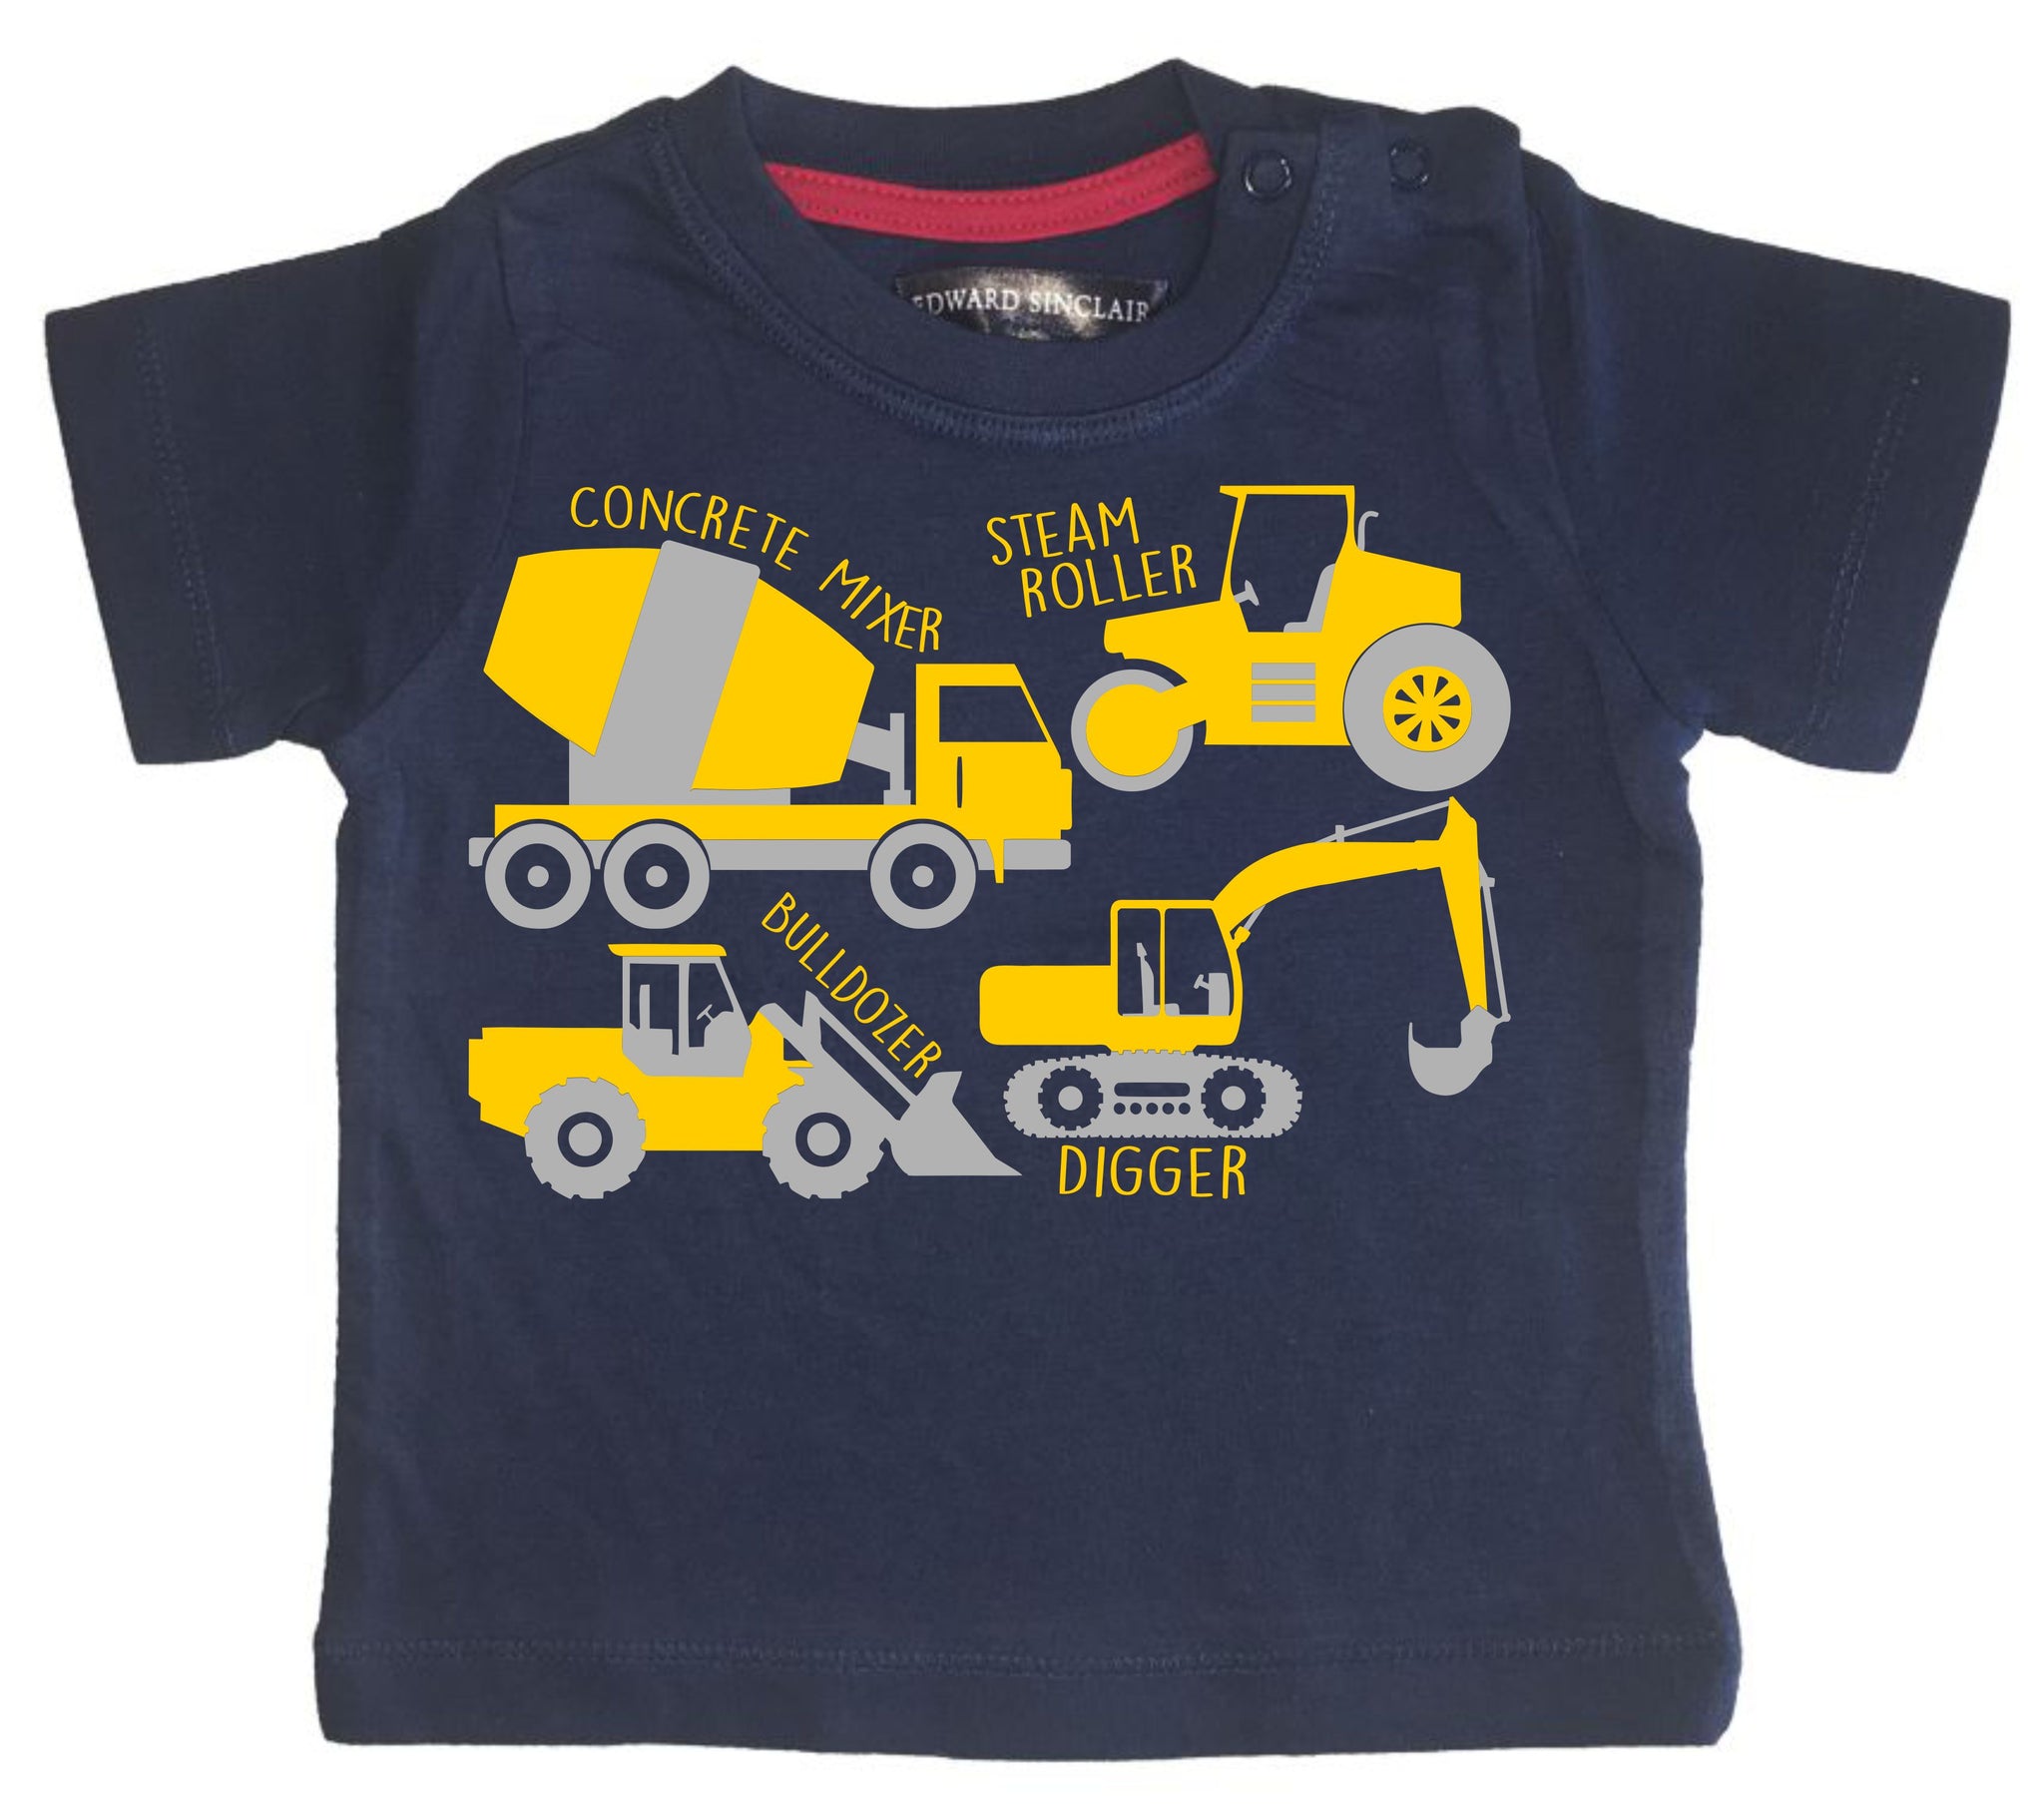 Construction Collage Children's T-shirt (Digger, bulldozer & more)